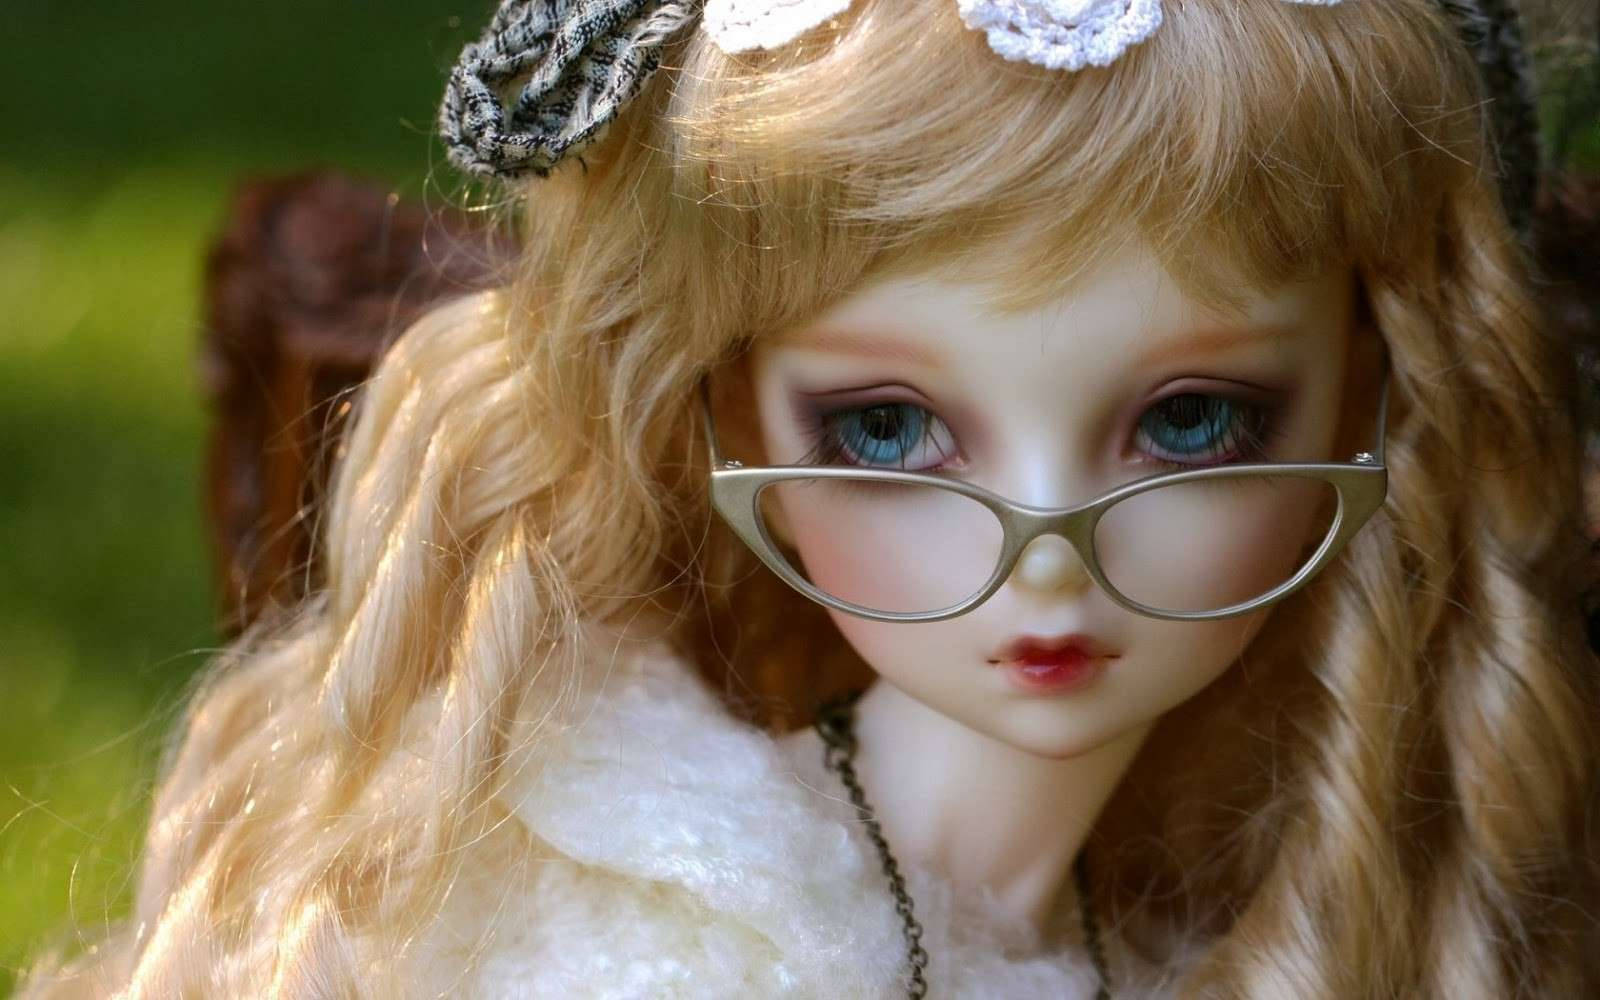 Download Barbie Doll With Cat Eye Glasses Wallpaper | Wallpapers.com